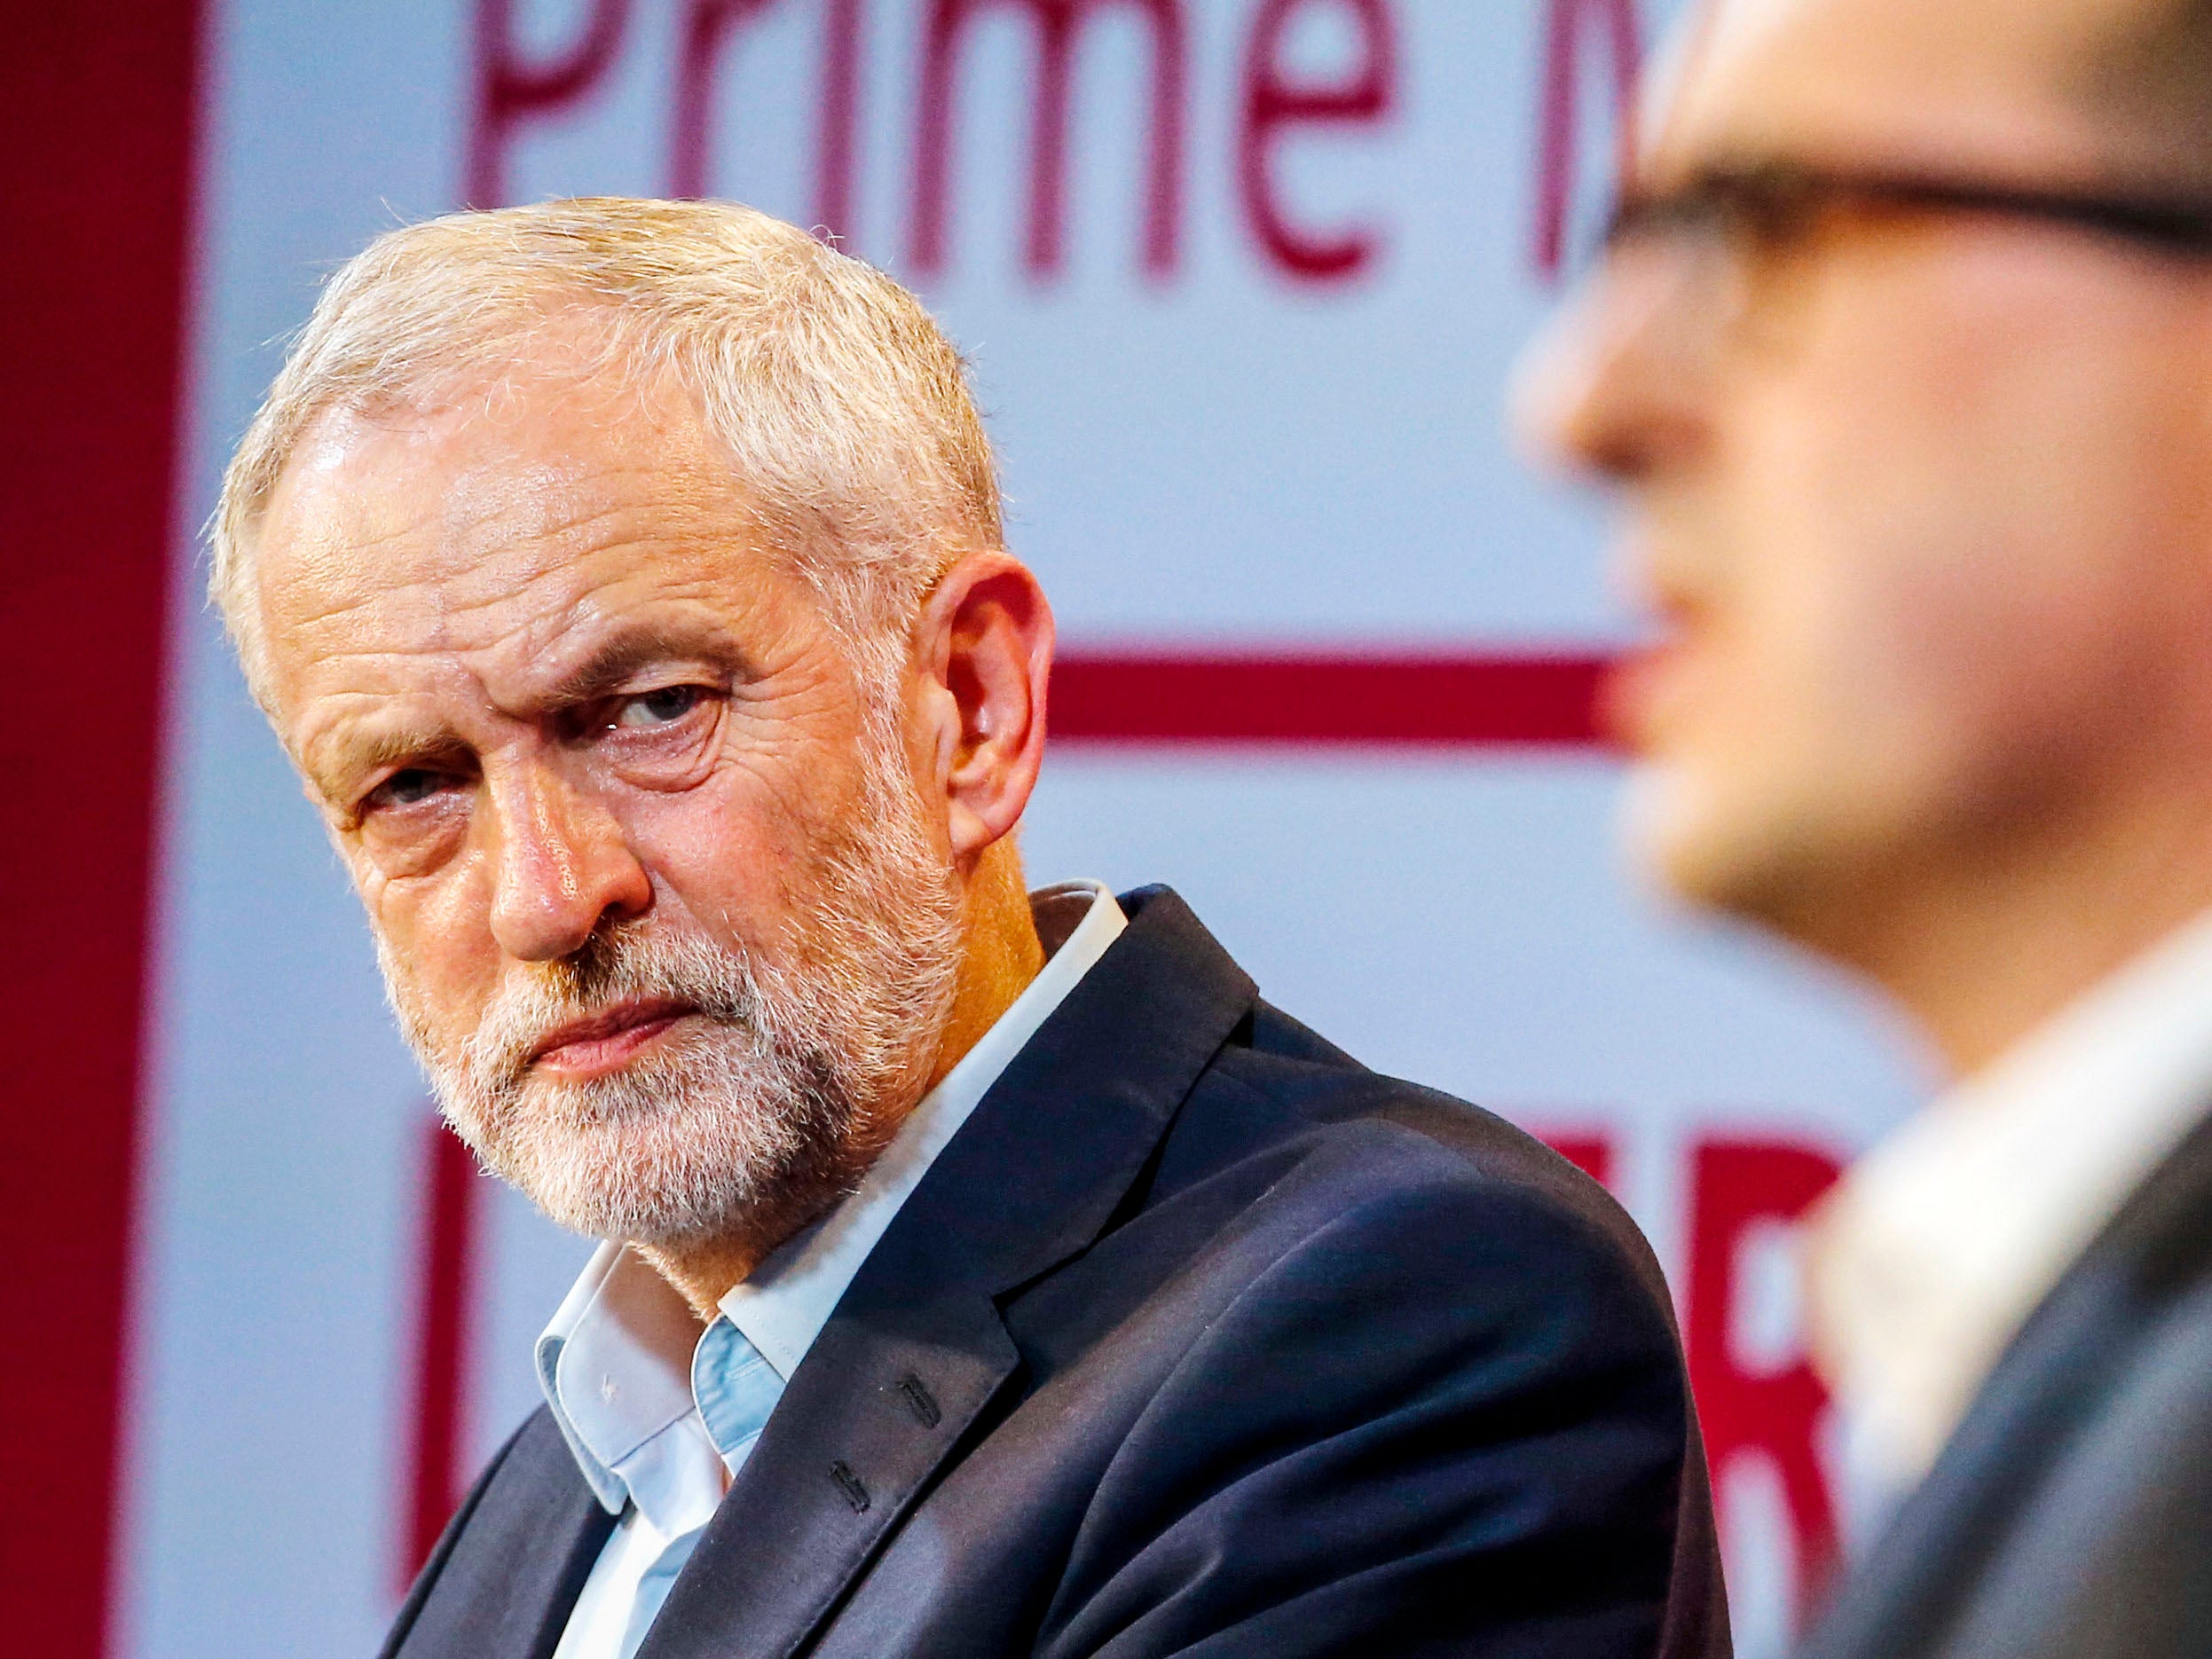 Jeremy Corbyn was delivered a blow by the Appeal Court ruling